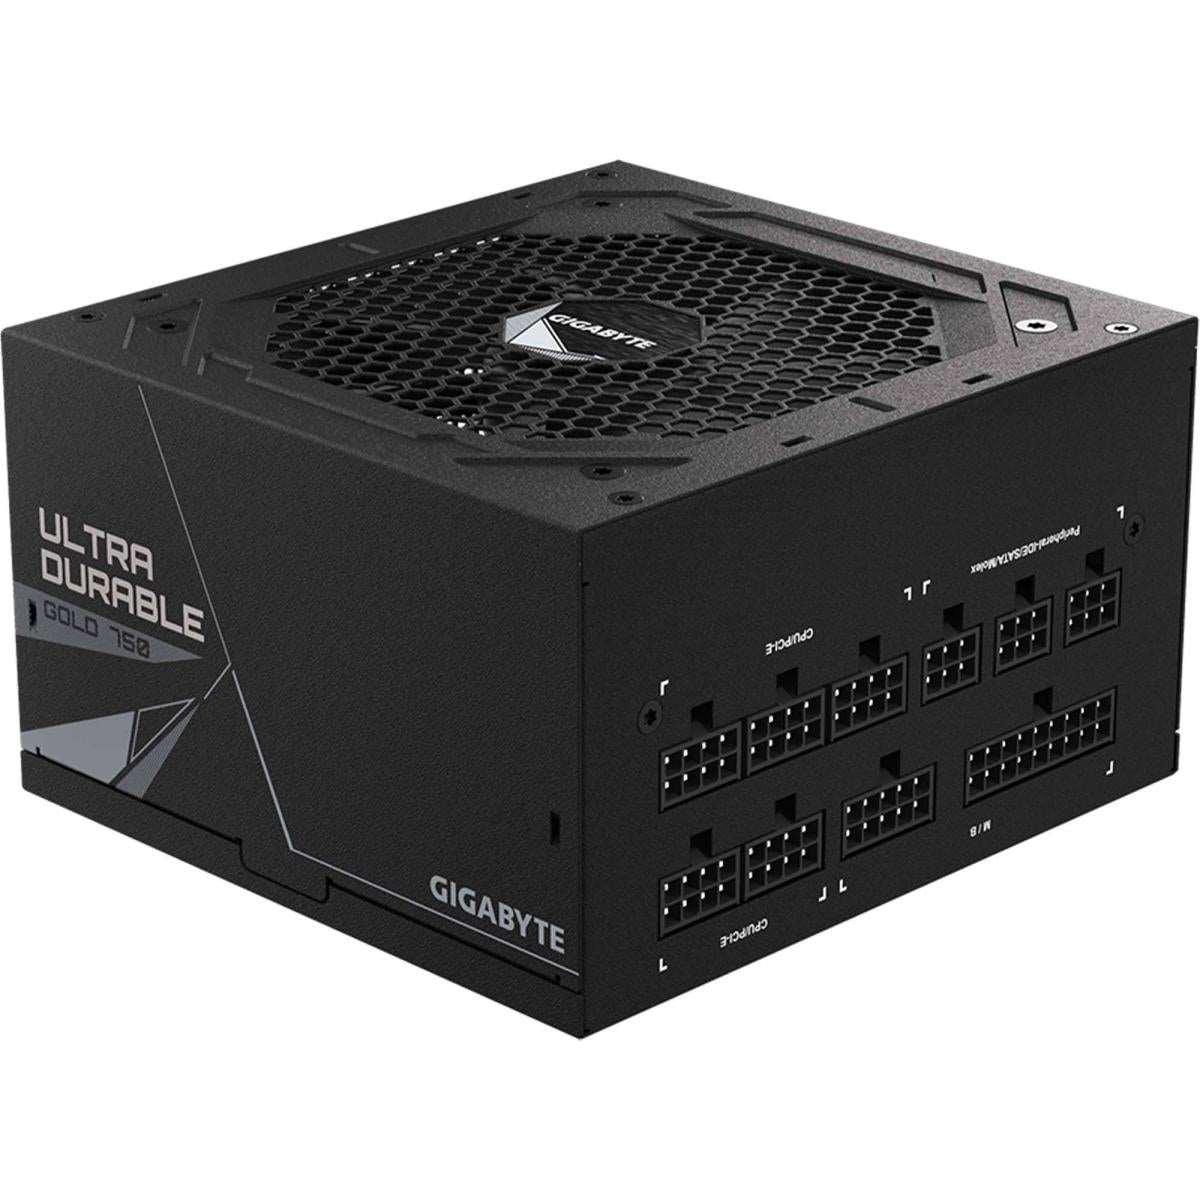 GIGABYTE POWER SUPPLY GIGABYTE UD750GM 750W 80 PLUS GOLD Full Modular Japanese Capacitors Ultra Durable Compact ATX Design Power Supply